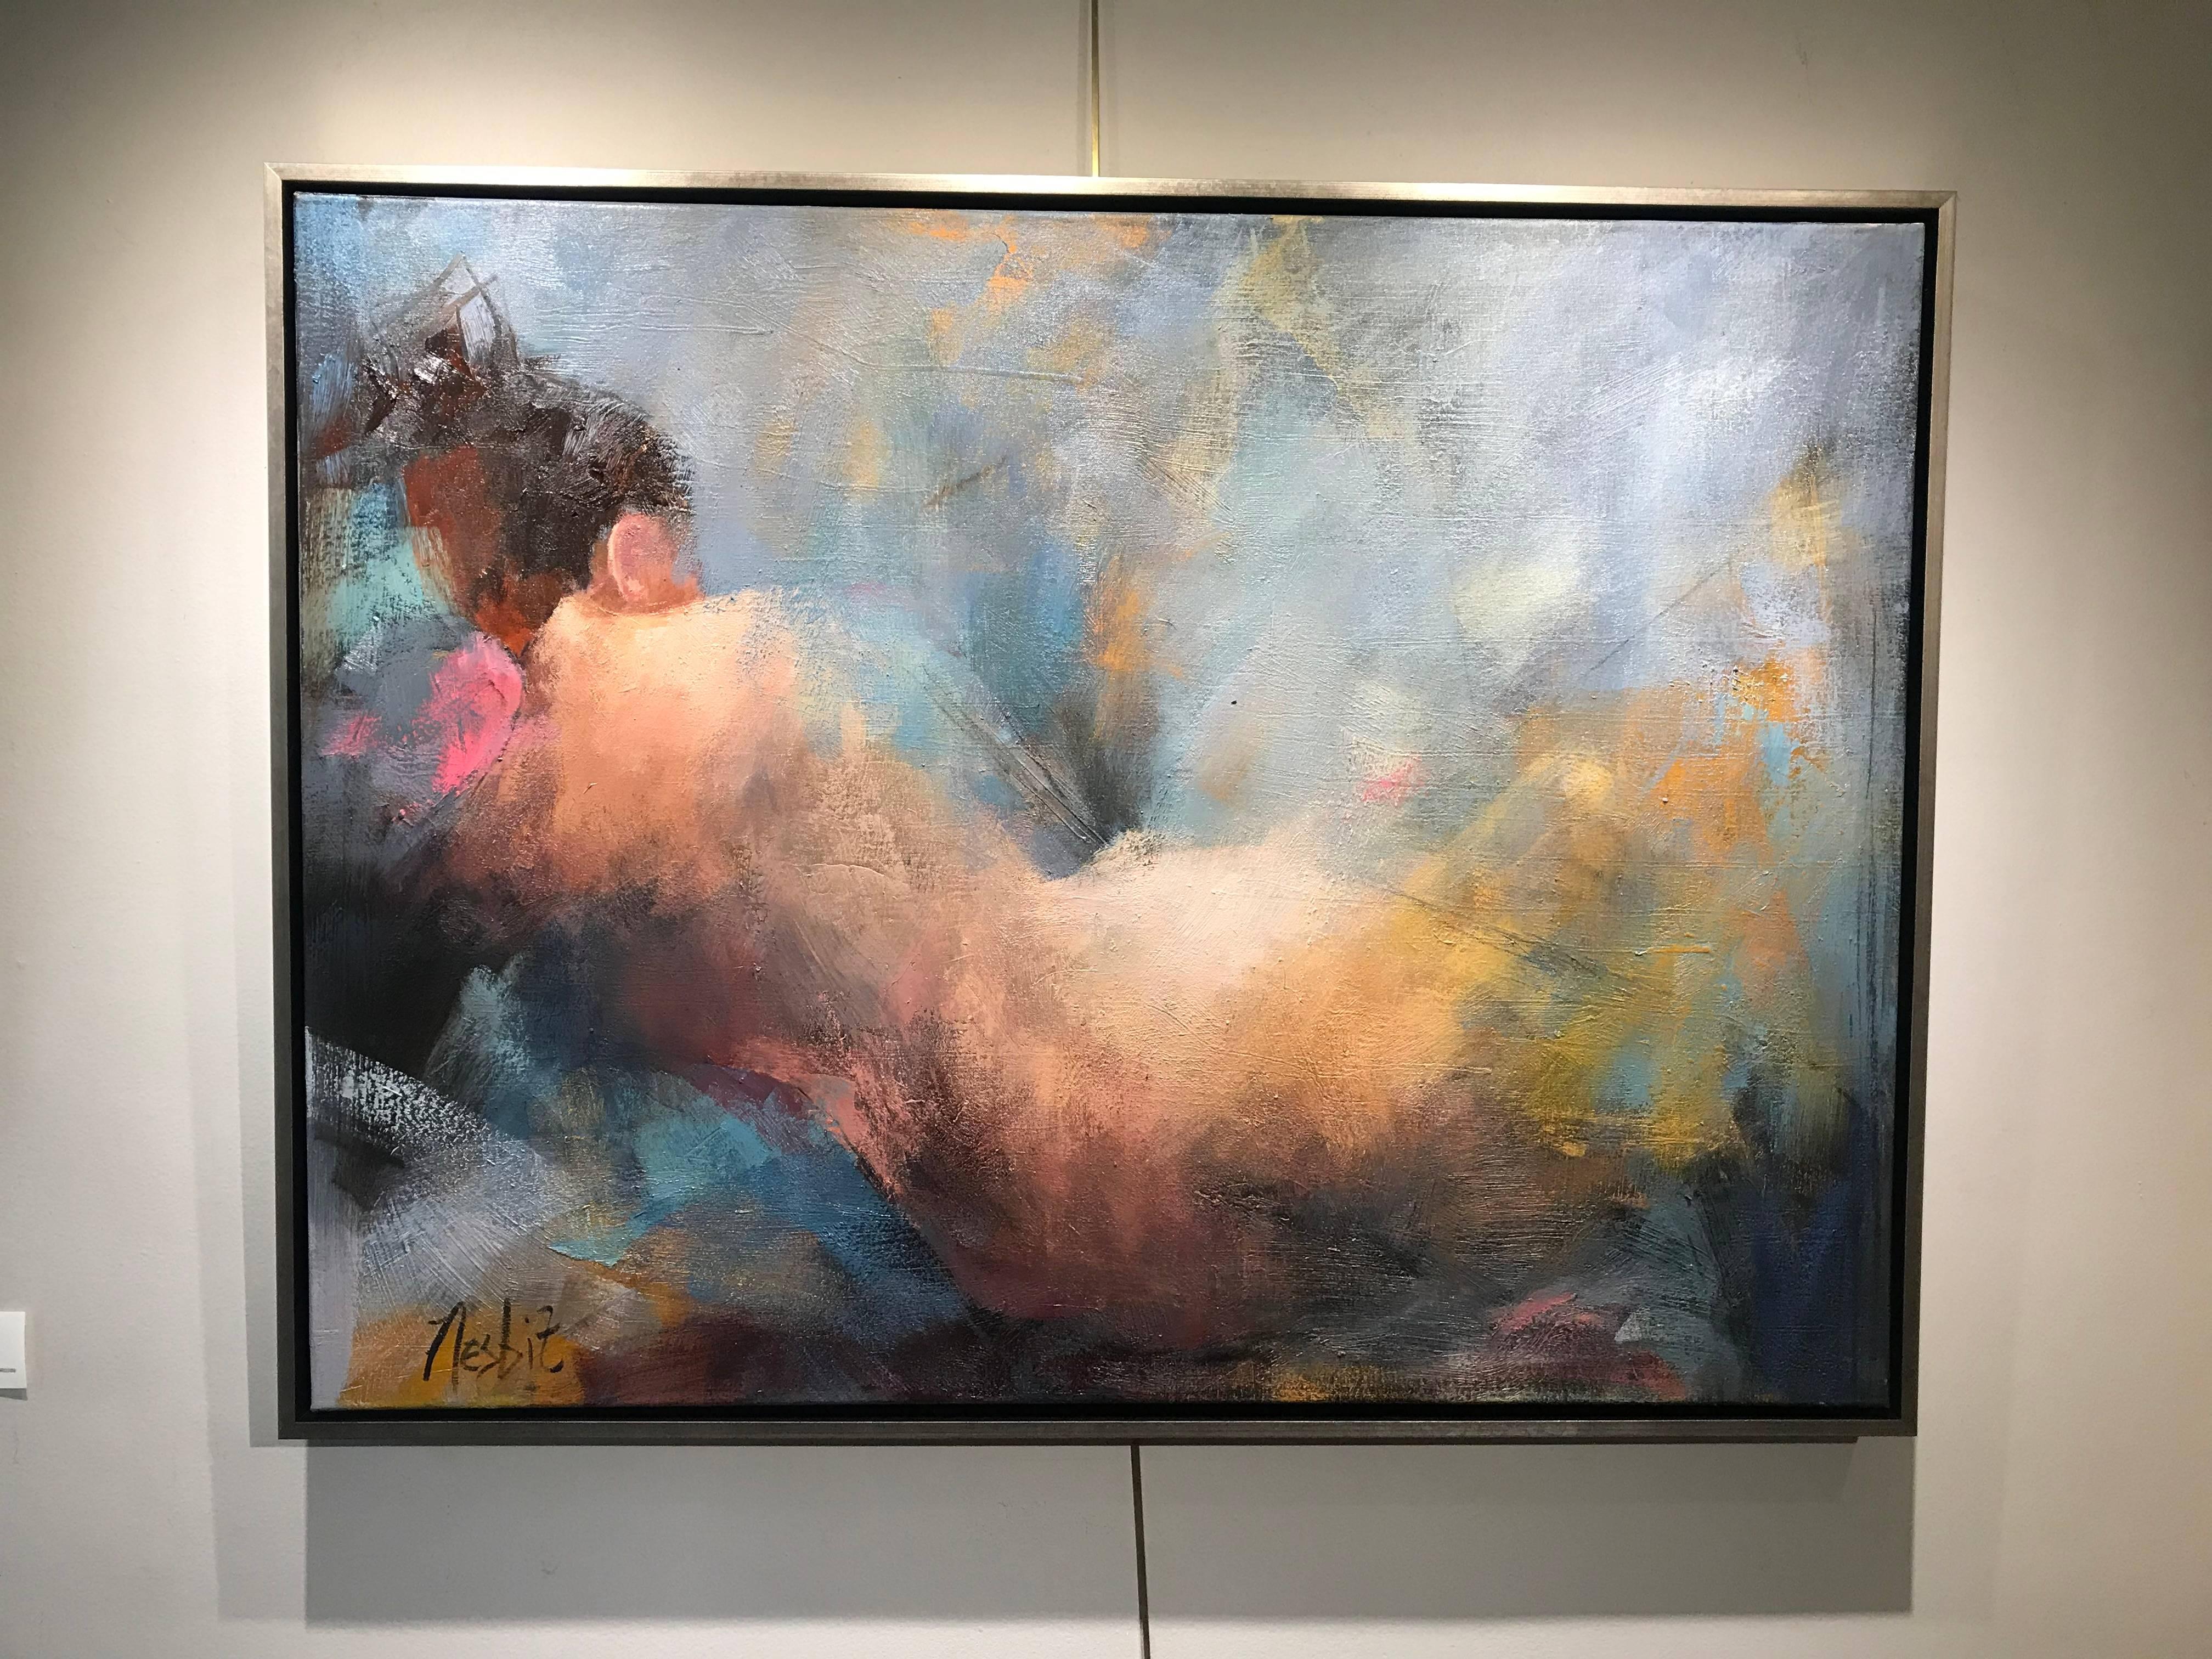 'Mysterious Ways' is an Impressionist horizontal format oil on canvas nude painting created by American artist Angela Nesbit in 2018. This piece is an exquisite depiction of a nude shown from the back, with the subject casually reclining on her